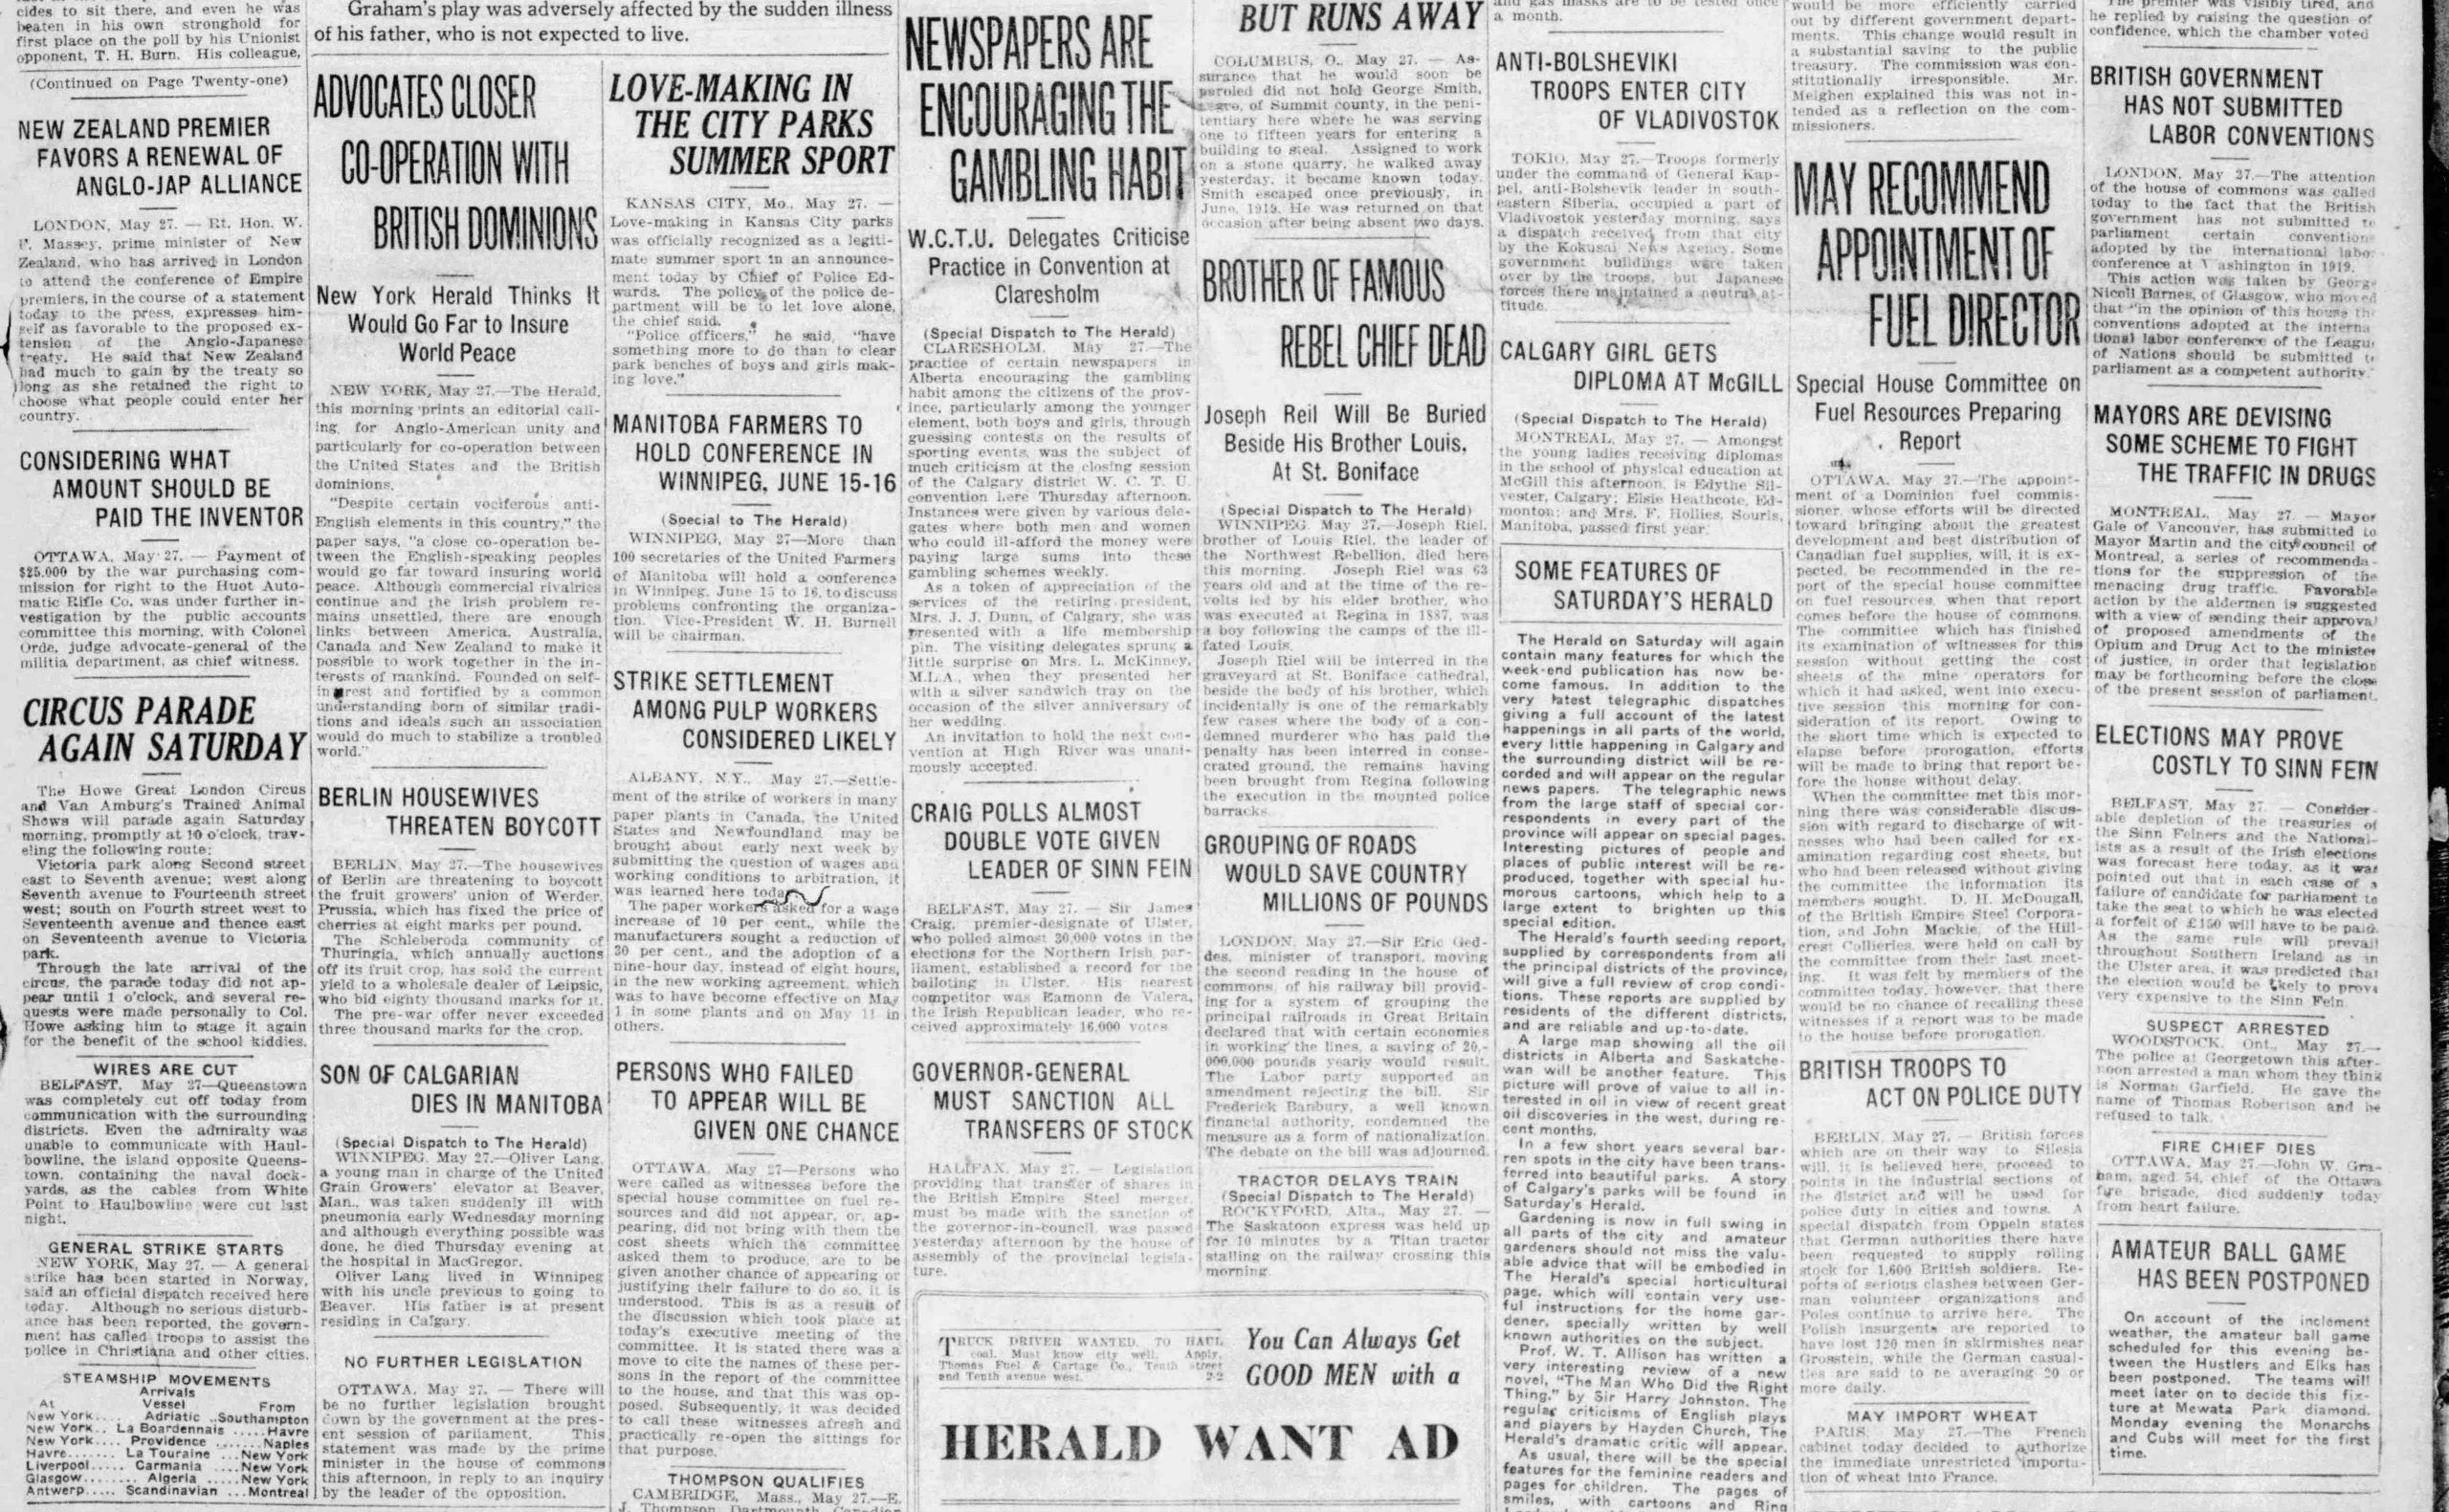 Love-Making in City Parks a Summer Sport Sex, Drugs and Gambling on the Front Page 100 years ago Calgary Herald